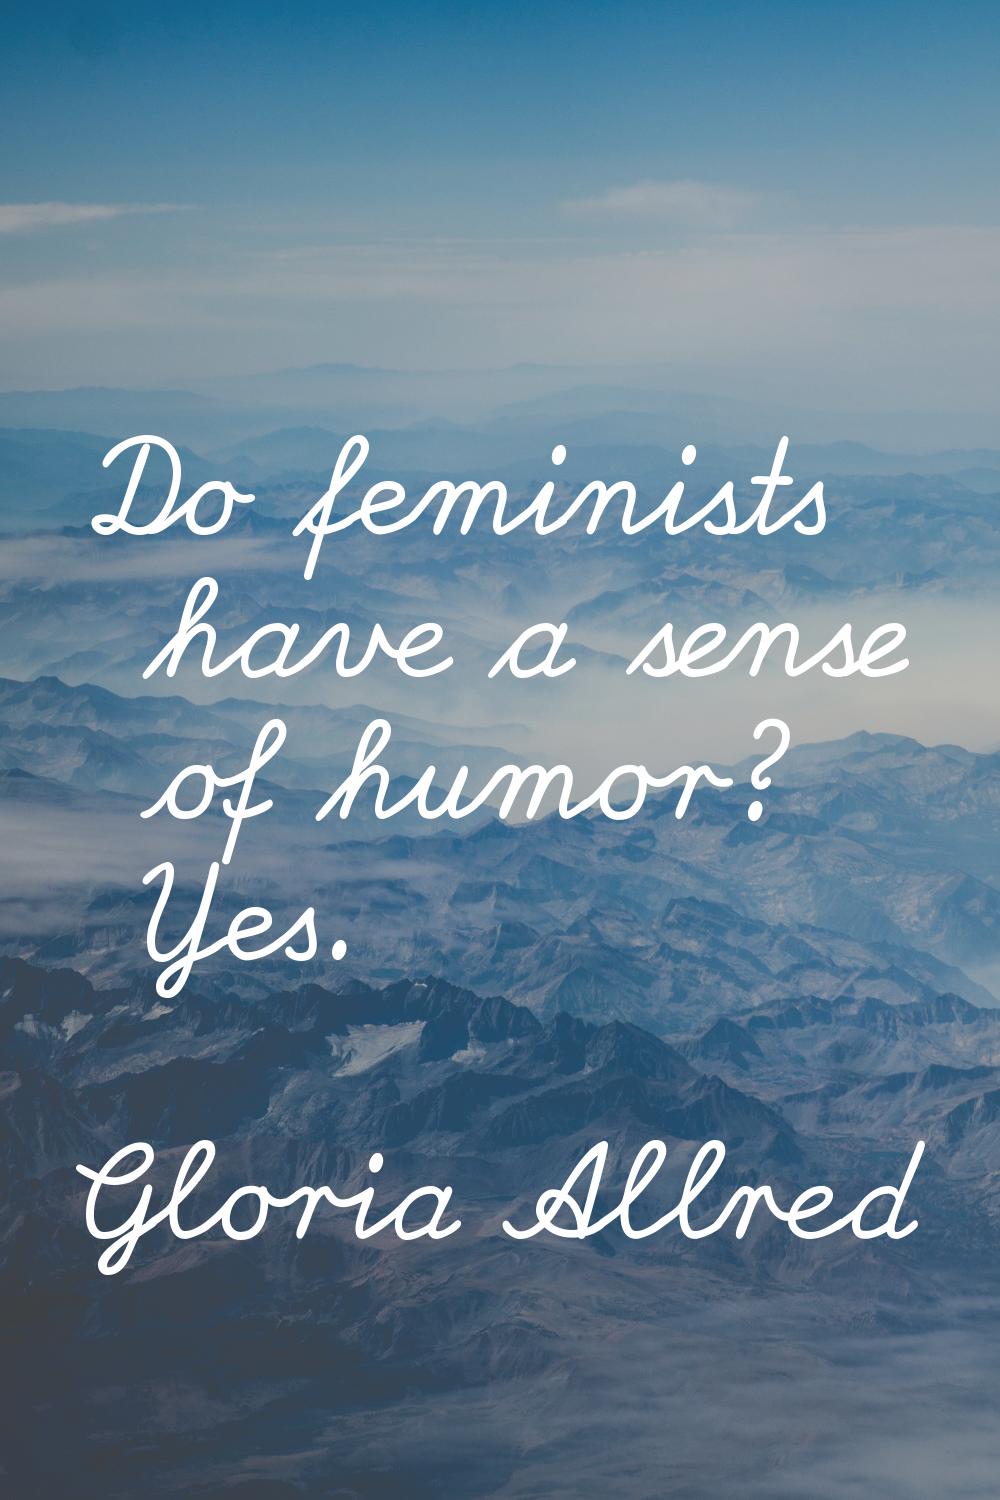 Do feminists have a sense of humor? Yes.